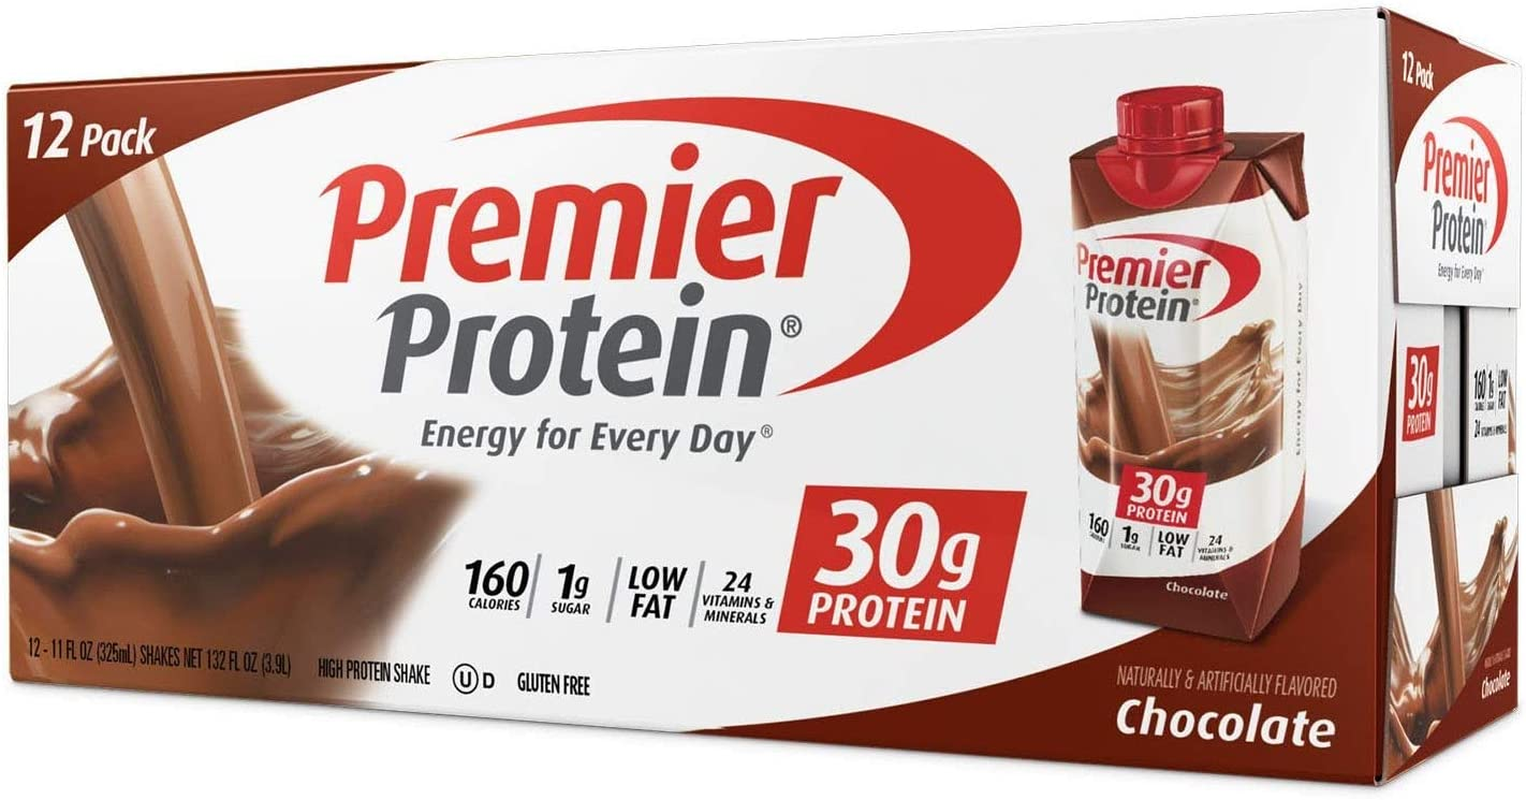 Premier Protein 30G Chocolate Protein Shakes,11 Fluid Ounces, 12 Pack